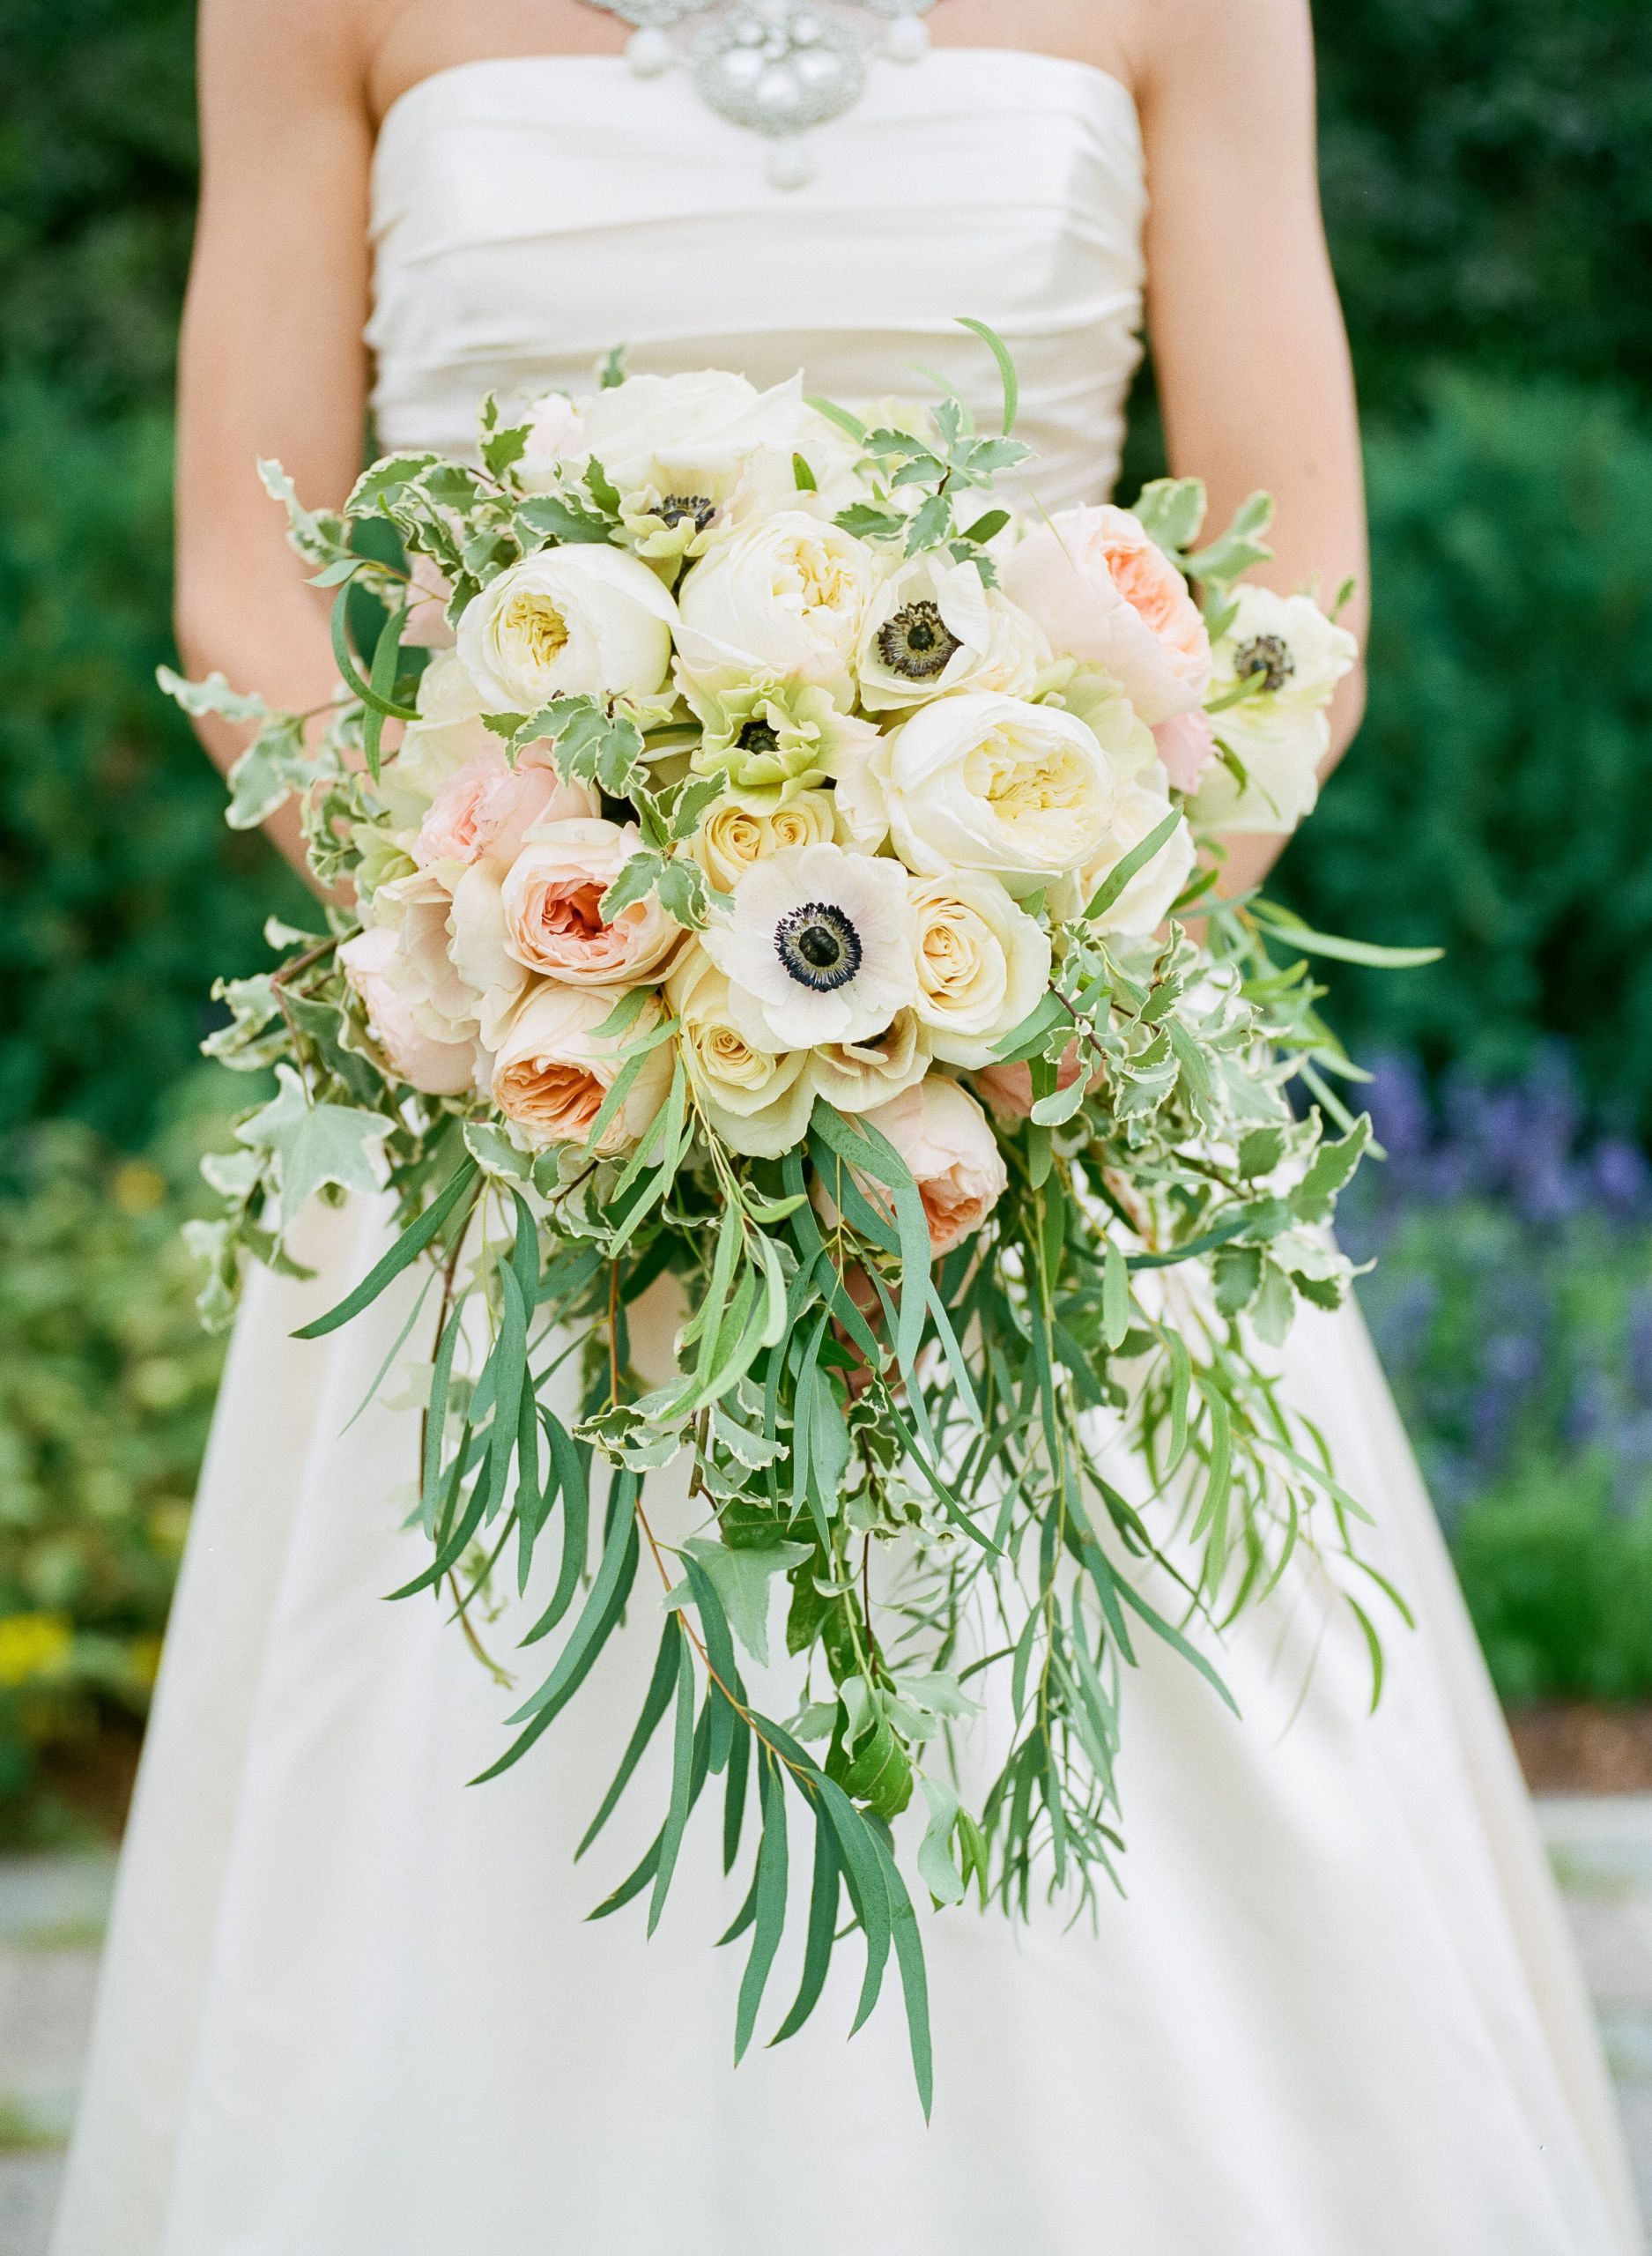 Wedding Flower Pictures
 Romantic Cascading Ivory Blush Bridal Bouquet with Greens